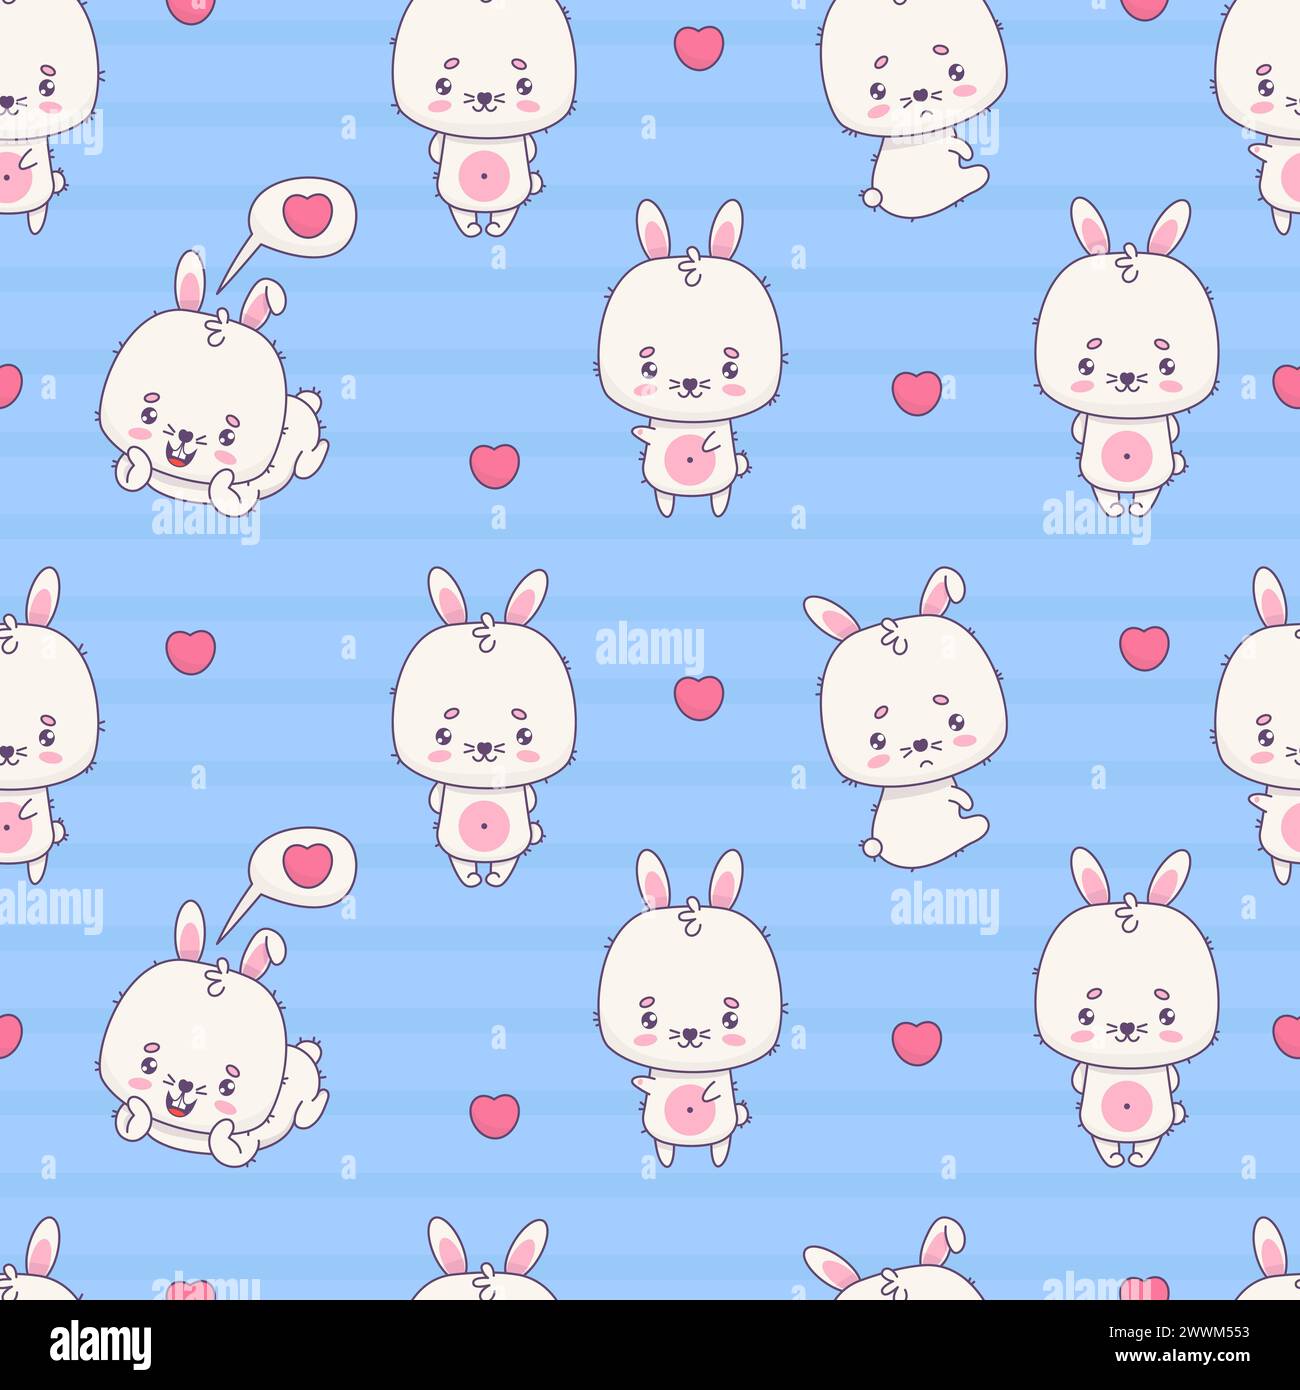 Seamless pattern with funny white bunny on blue background with hearts. Cute kawaii animal character. Vector illustration. Kids collection. Stock Vector